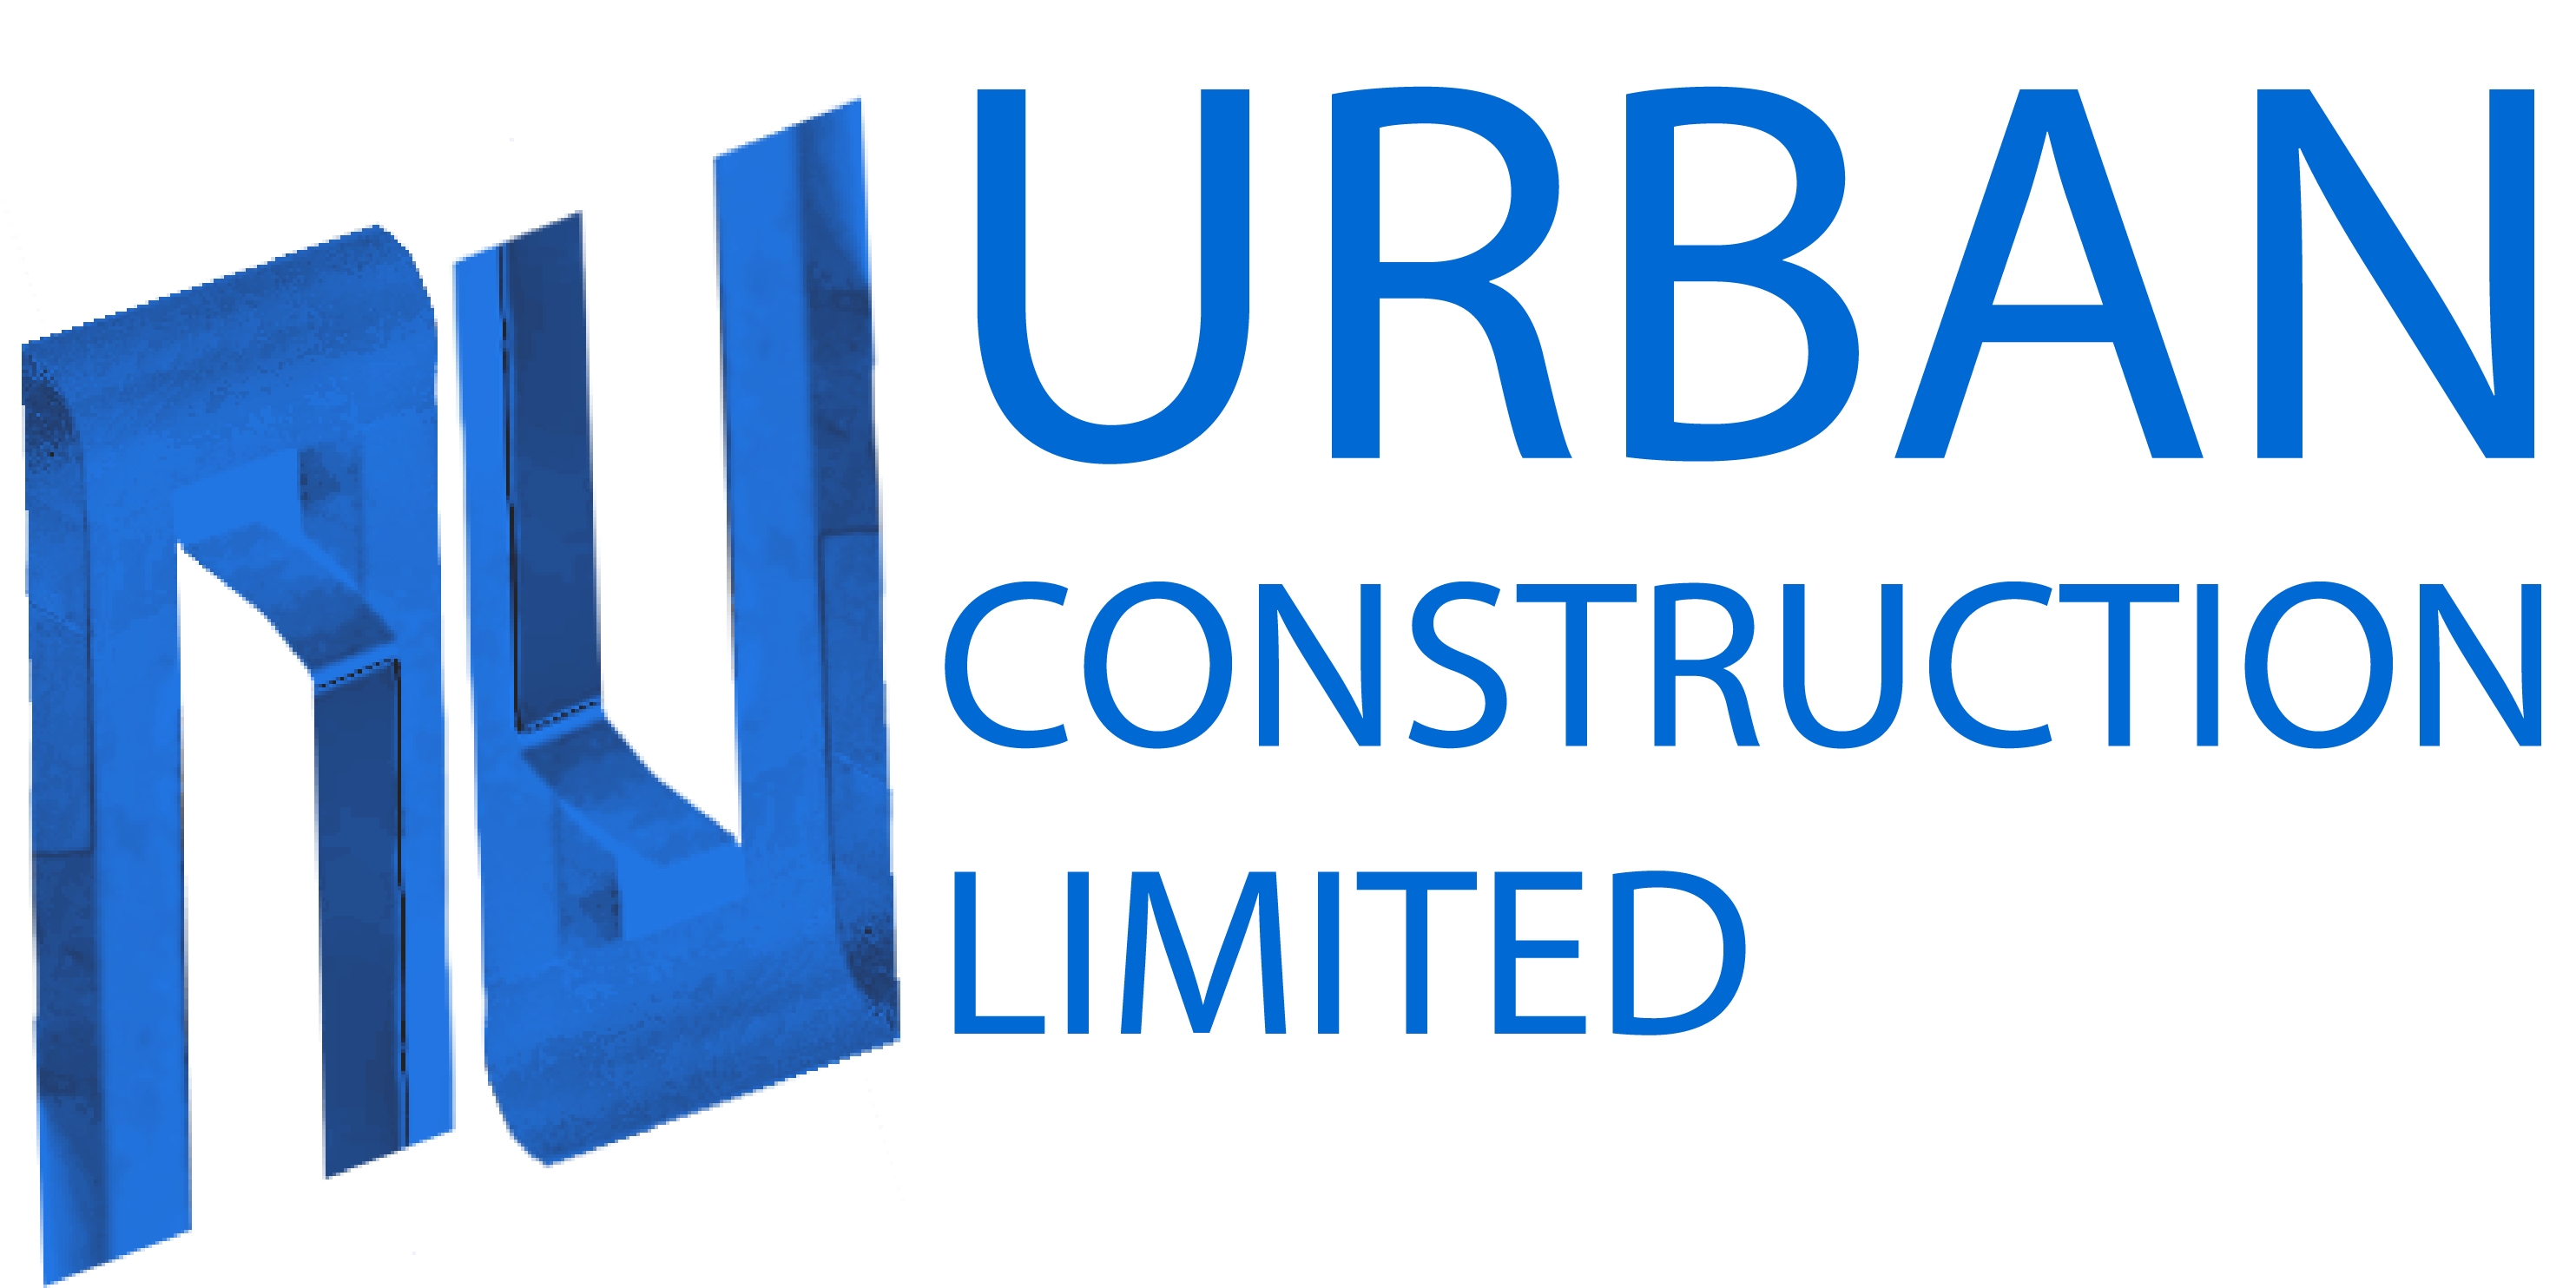 Urban Construction Limited